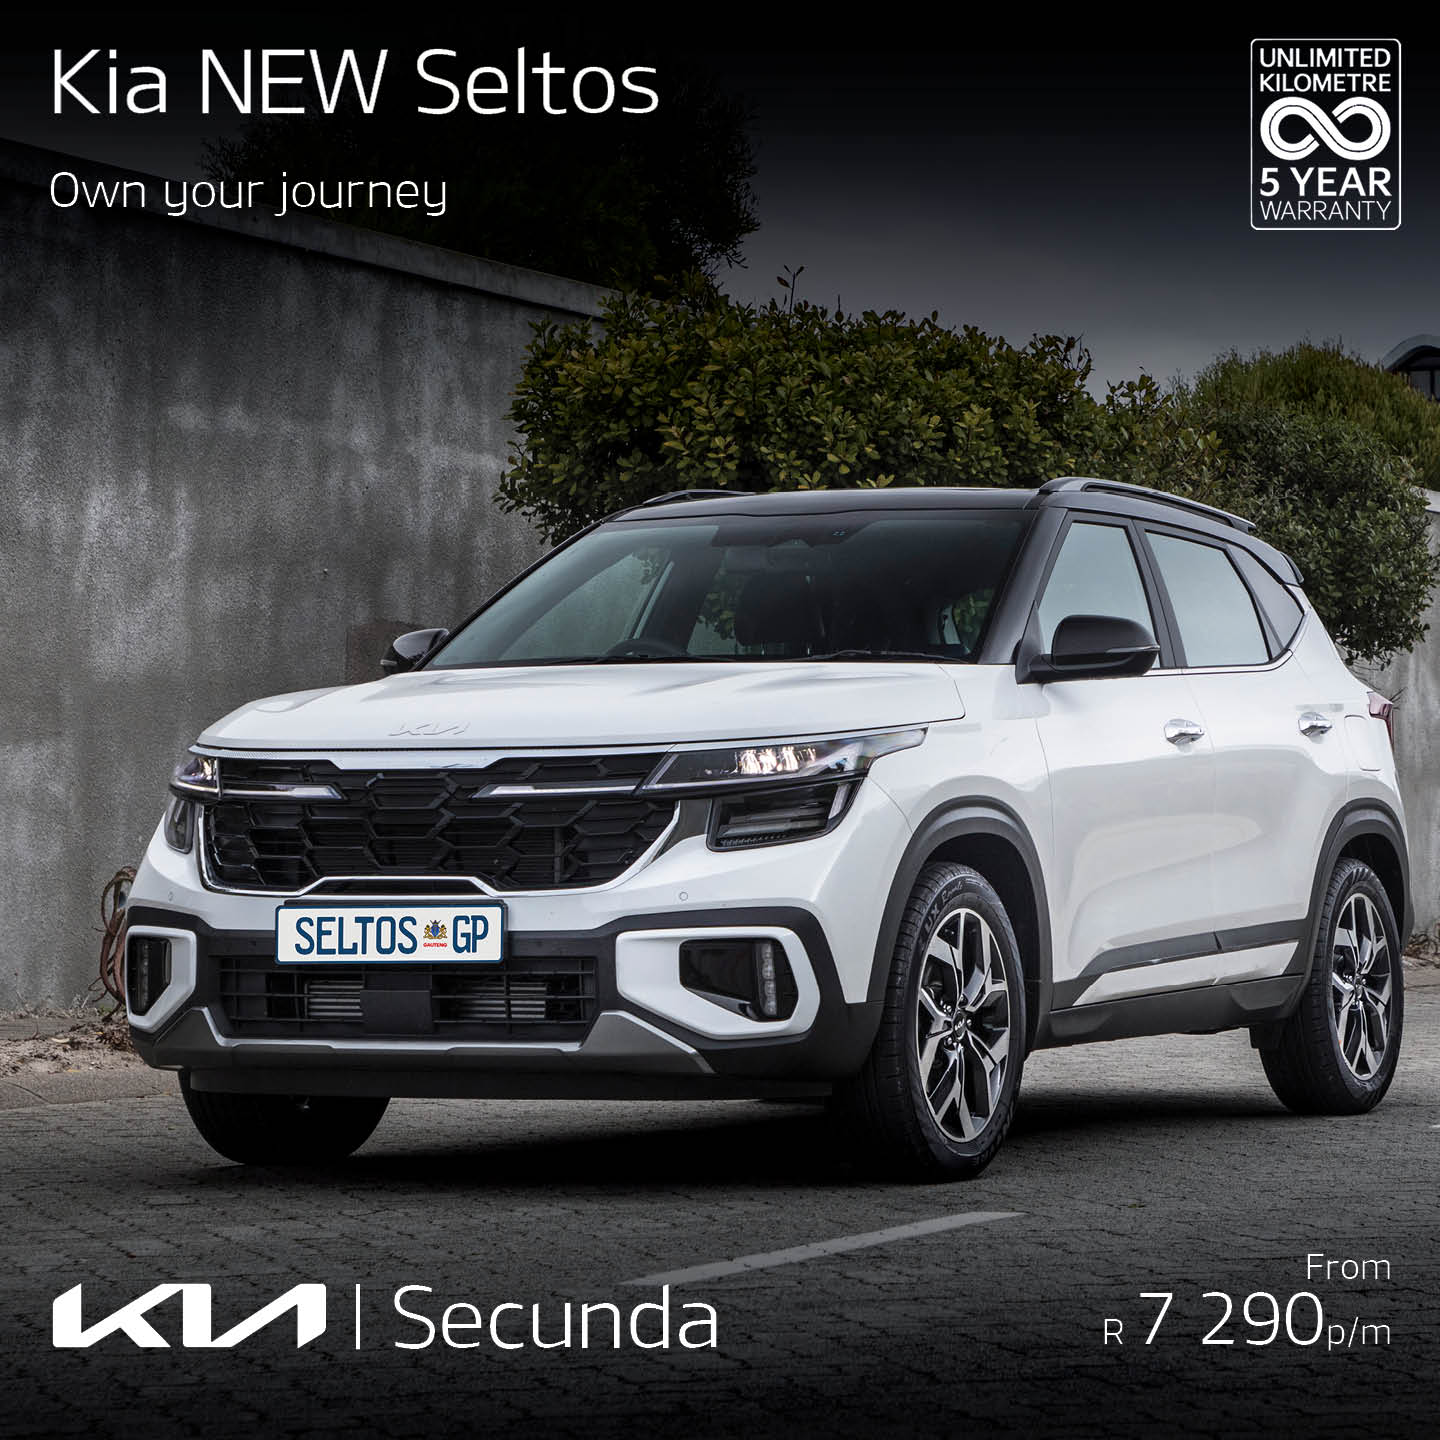 Own your journey with the NEW KIA SELTOS image from 